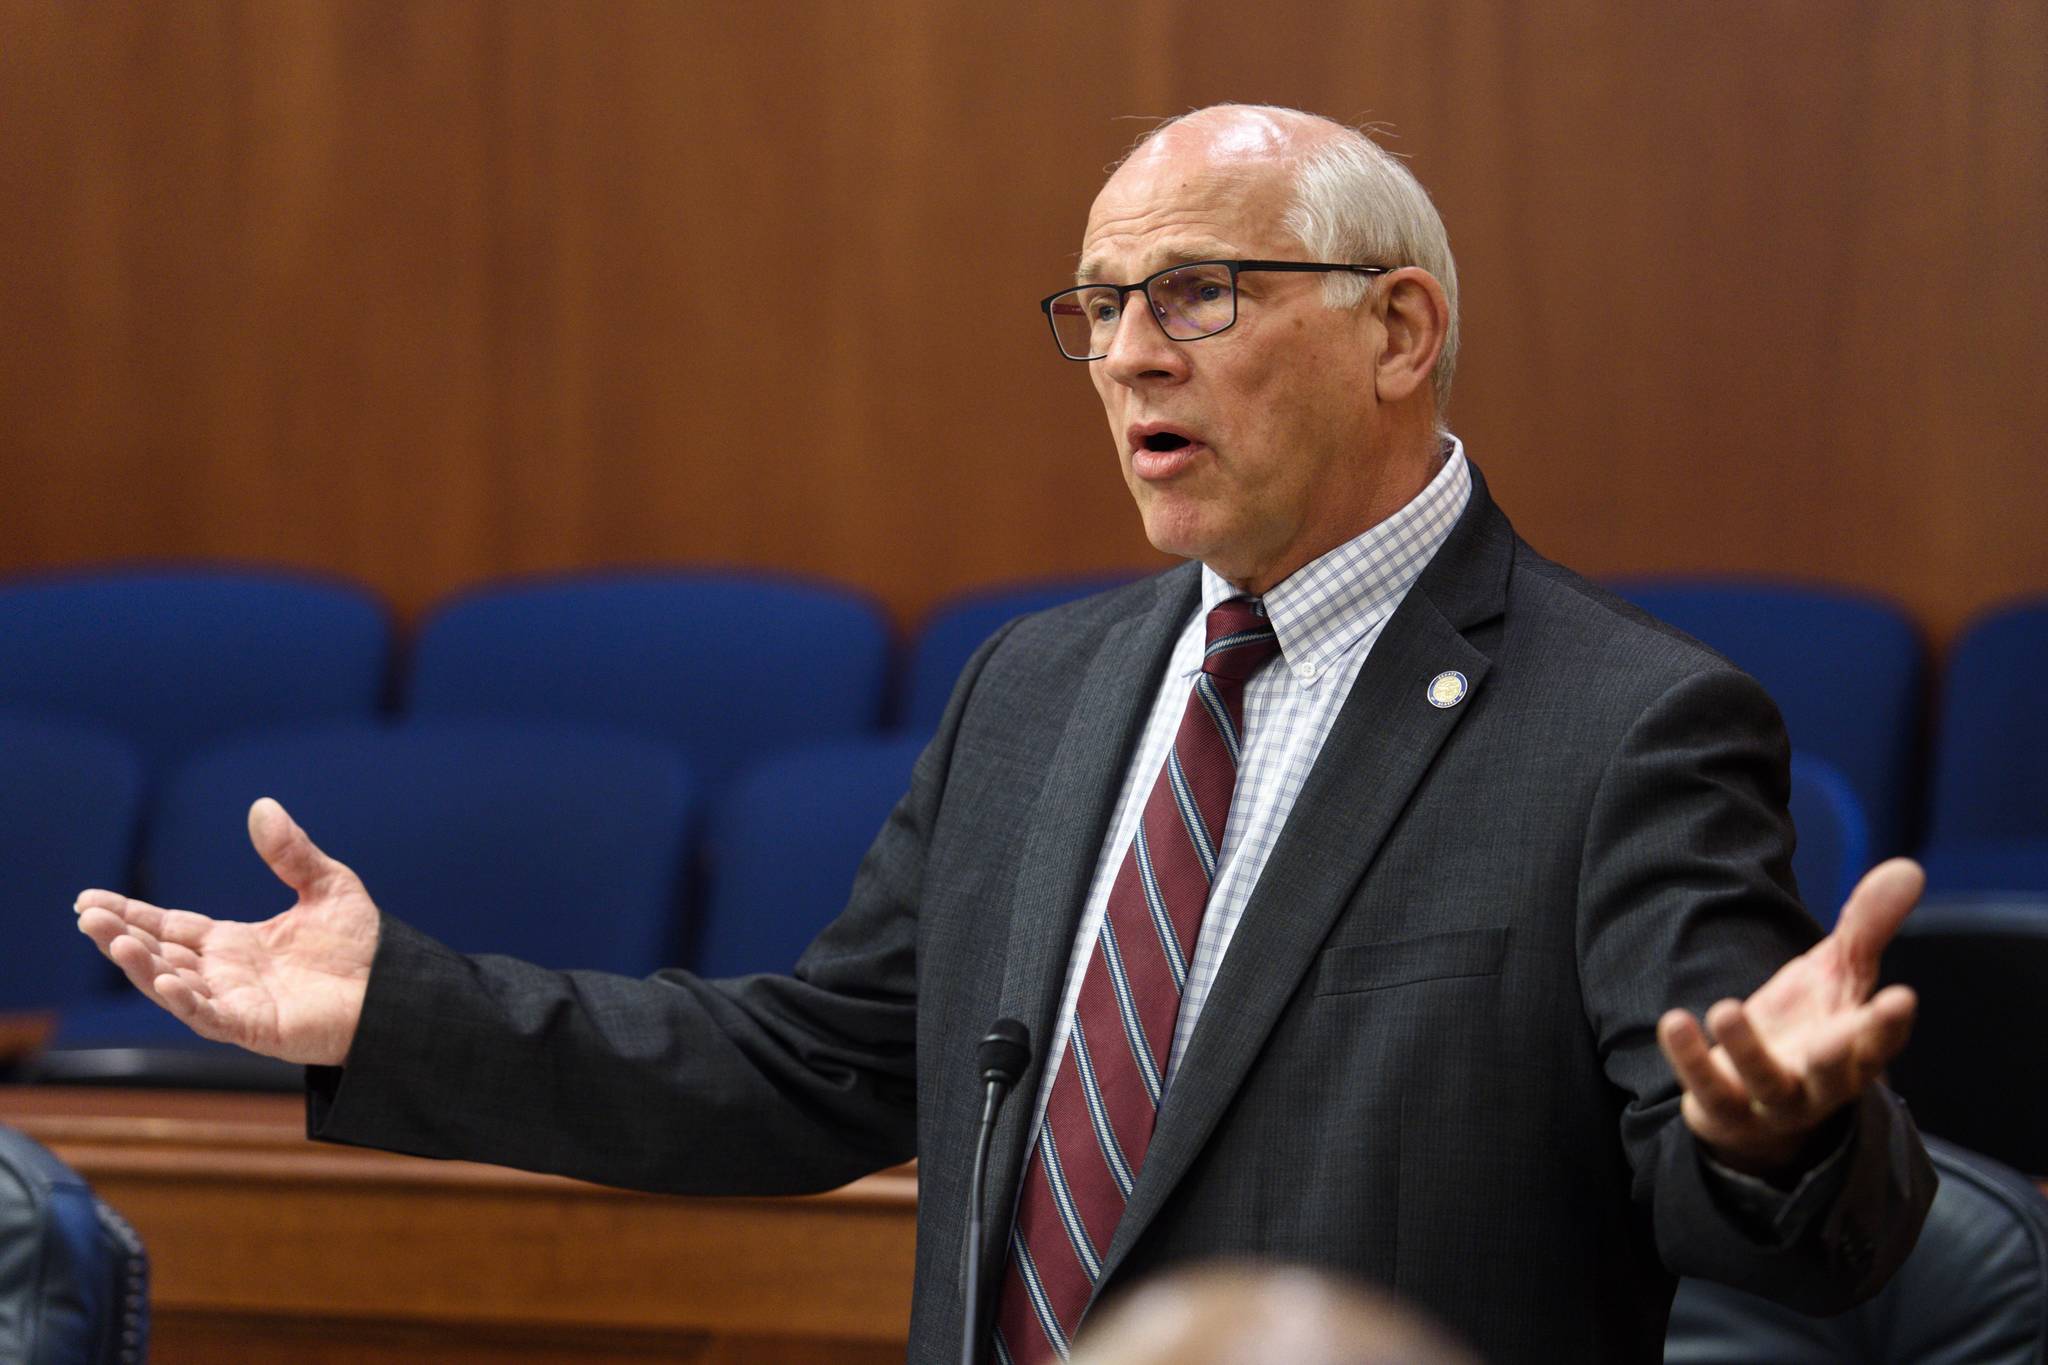 Sen. John Coghill, R-North Pole, speaks against paying a full dividend during debate on the size of the Alaska Permanent Fund Dividend in the Alaska Senate on Tuesday, June 4, 2019. (Michael Penn | Juneau Empire)